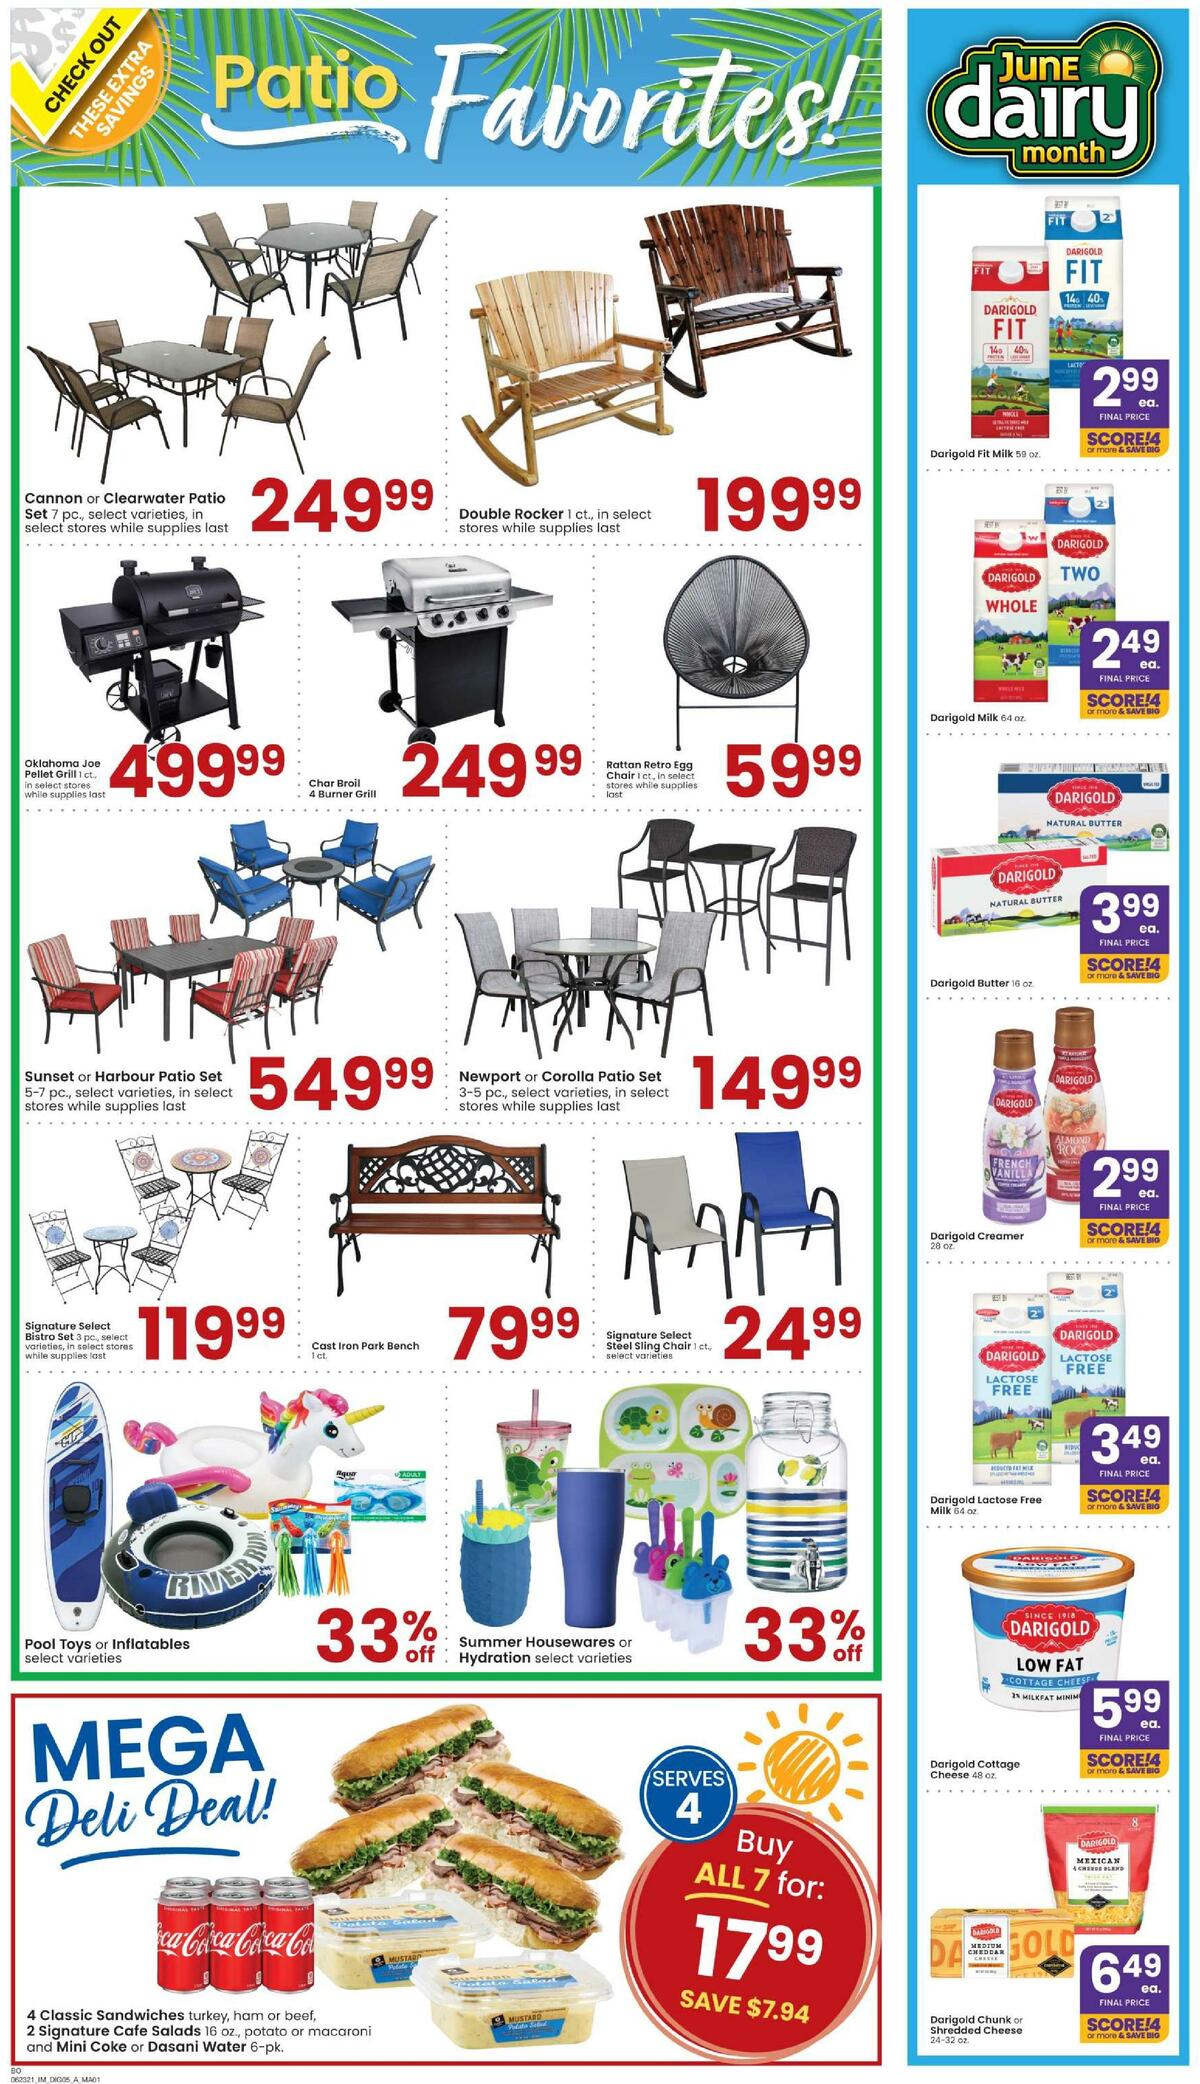 Albertsons Weekly Ad from June 23